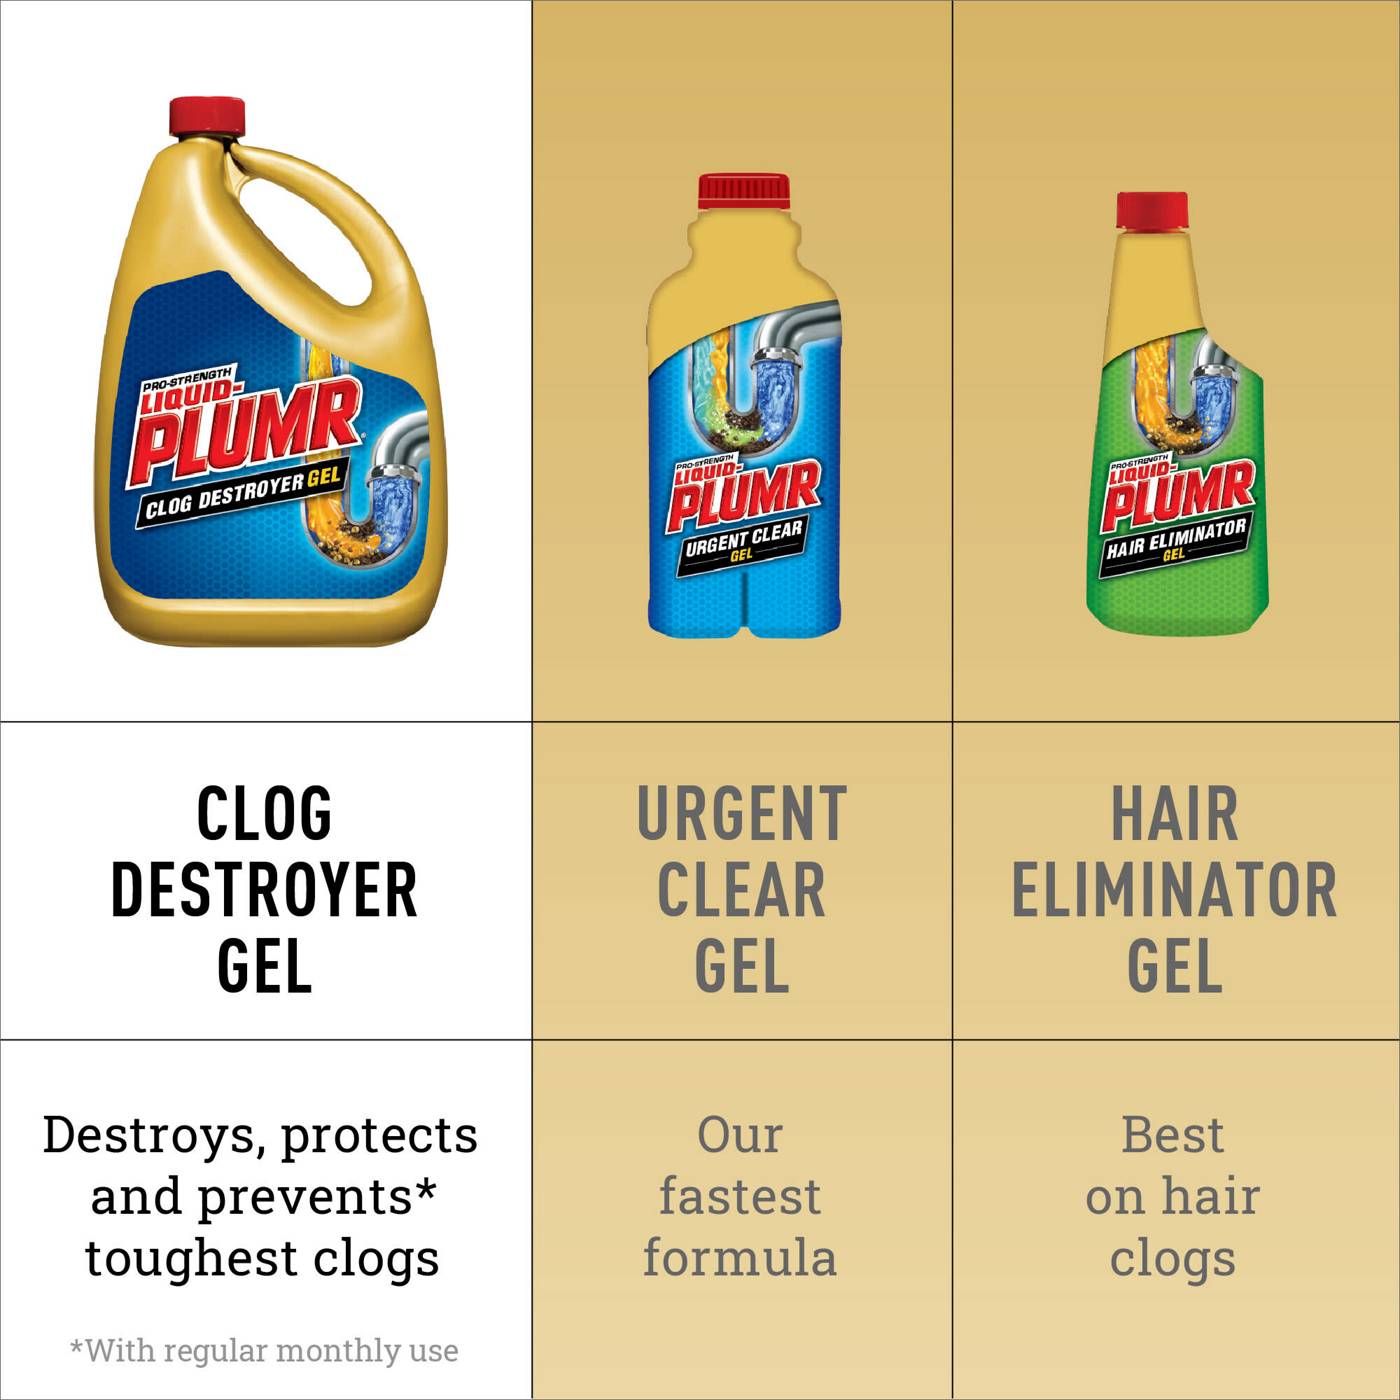 Liquid-Plumr Pro-Strength Clog Destroyer Gel with PipeGuard, Liquid Drain Cleaner; image 6 of 8